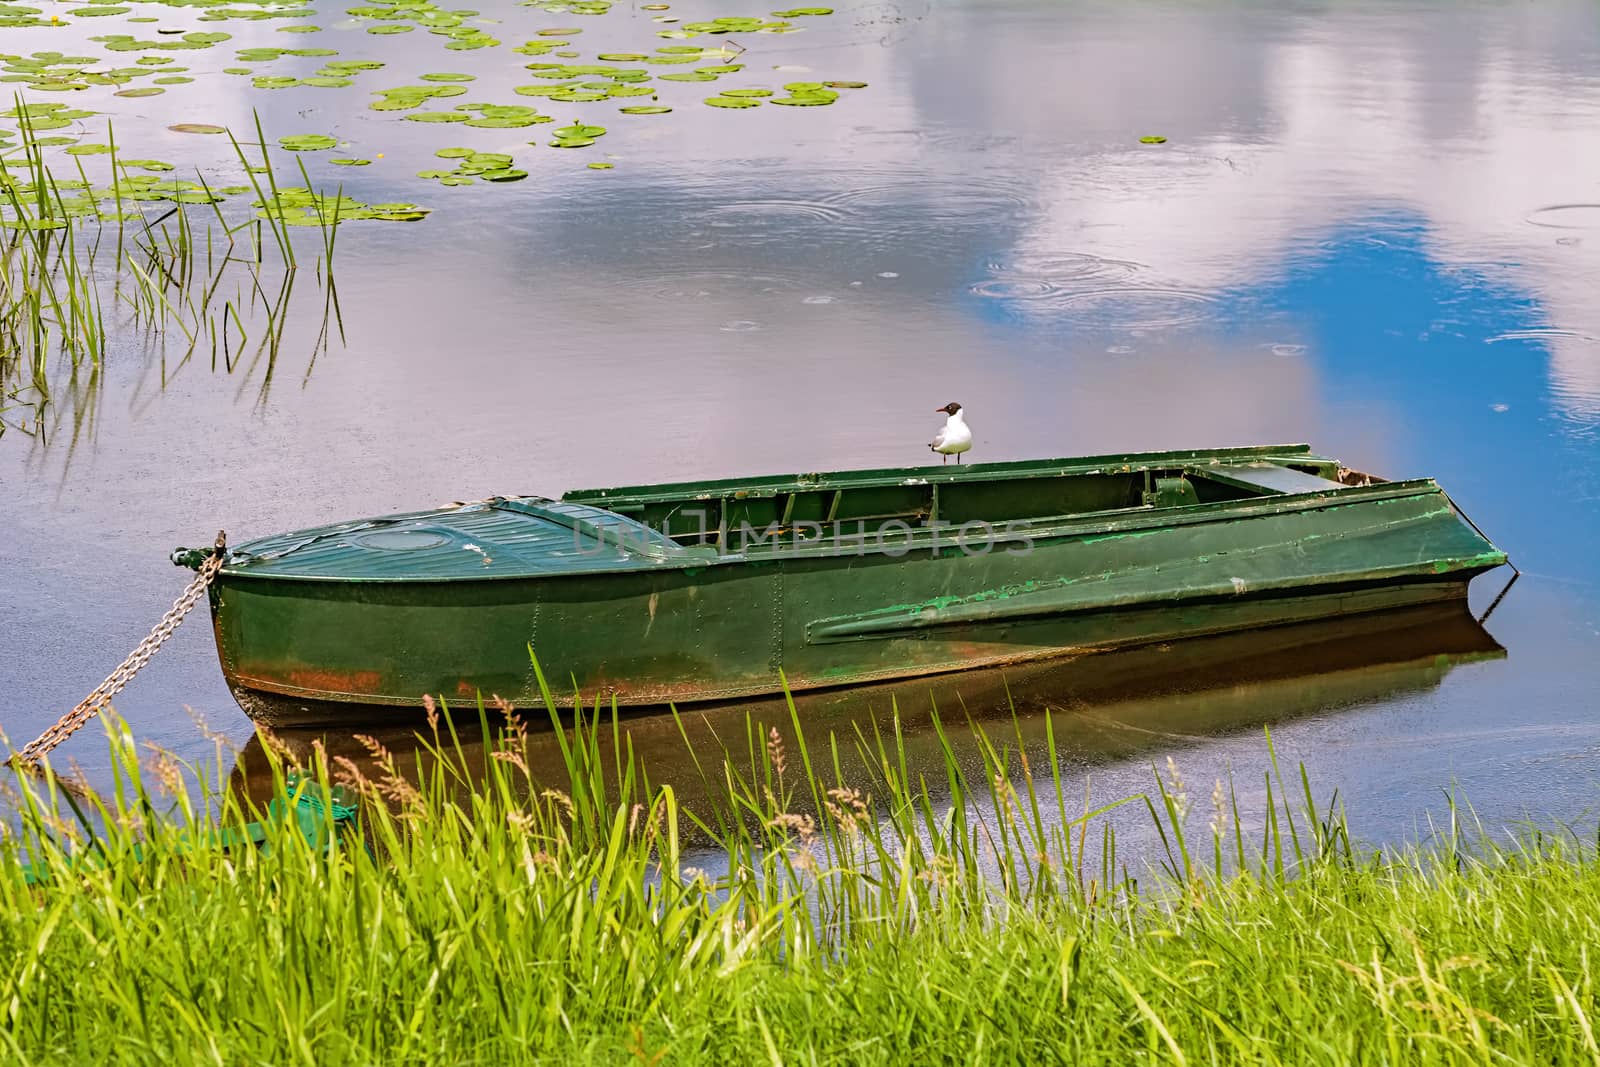 Metal rowboat on the lake  by SNR